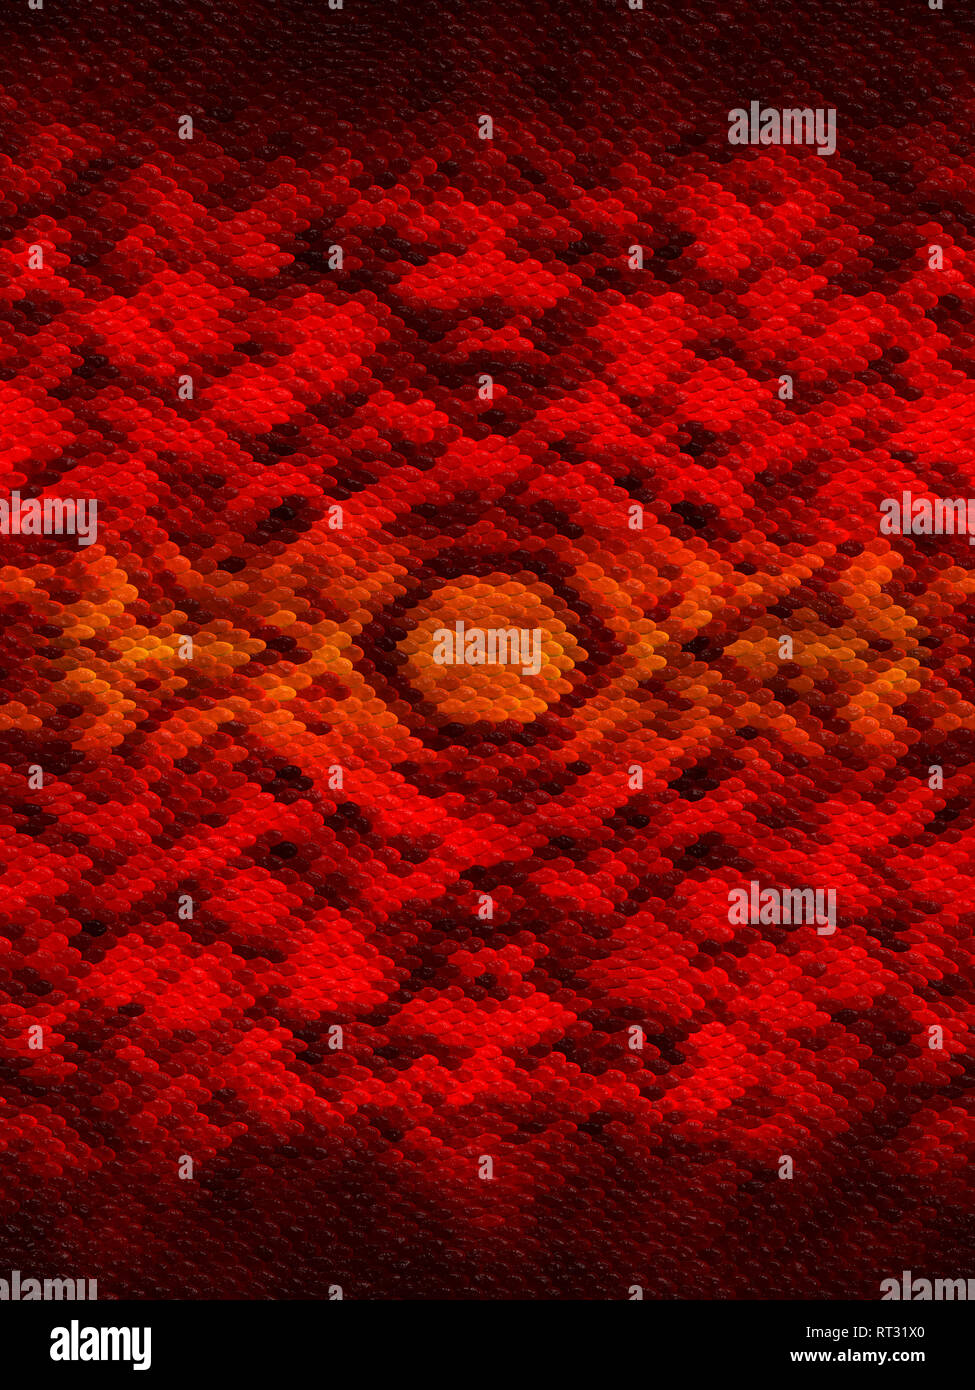 Red, orange and brown patterned background with snake skin effect Stock Photo